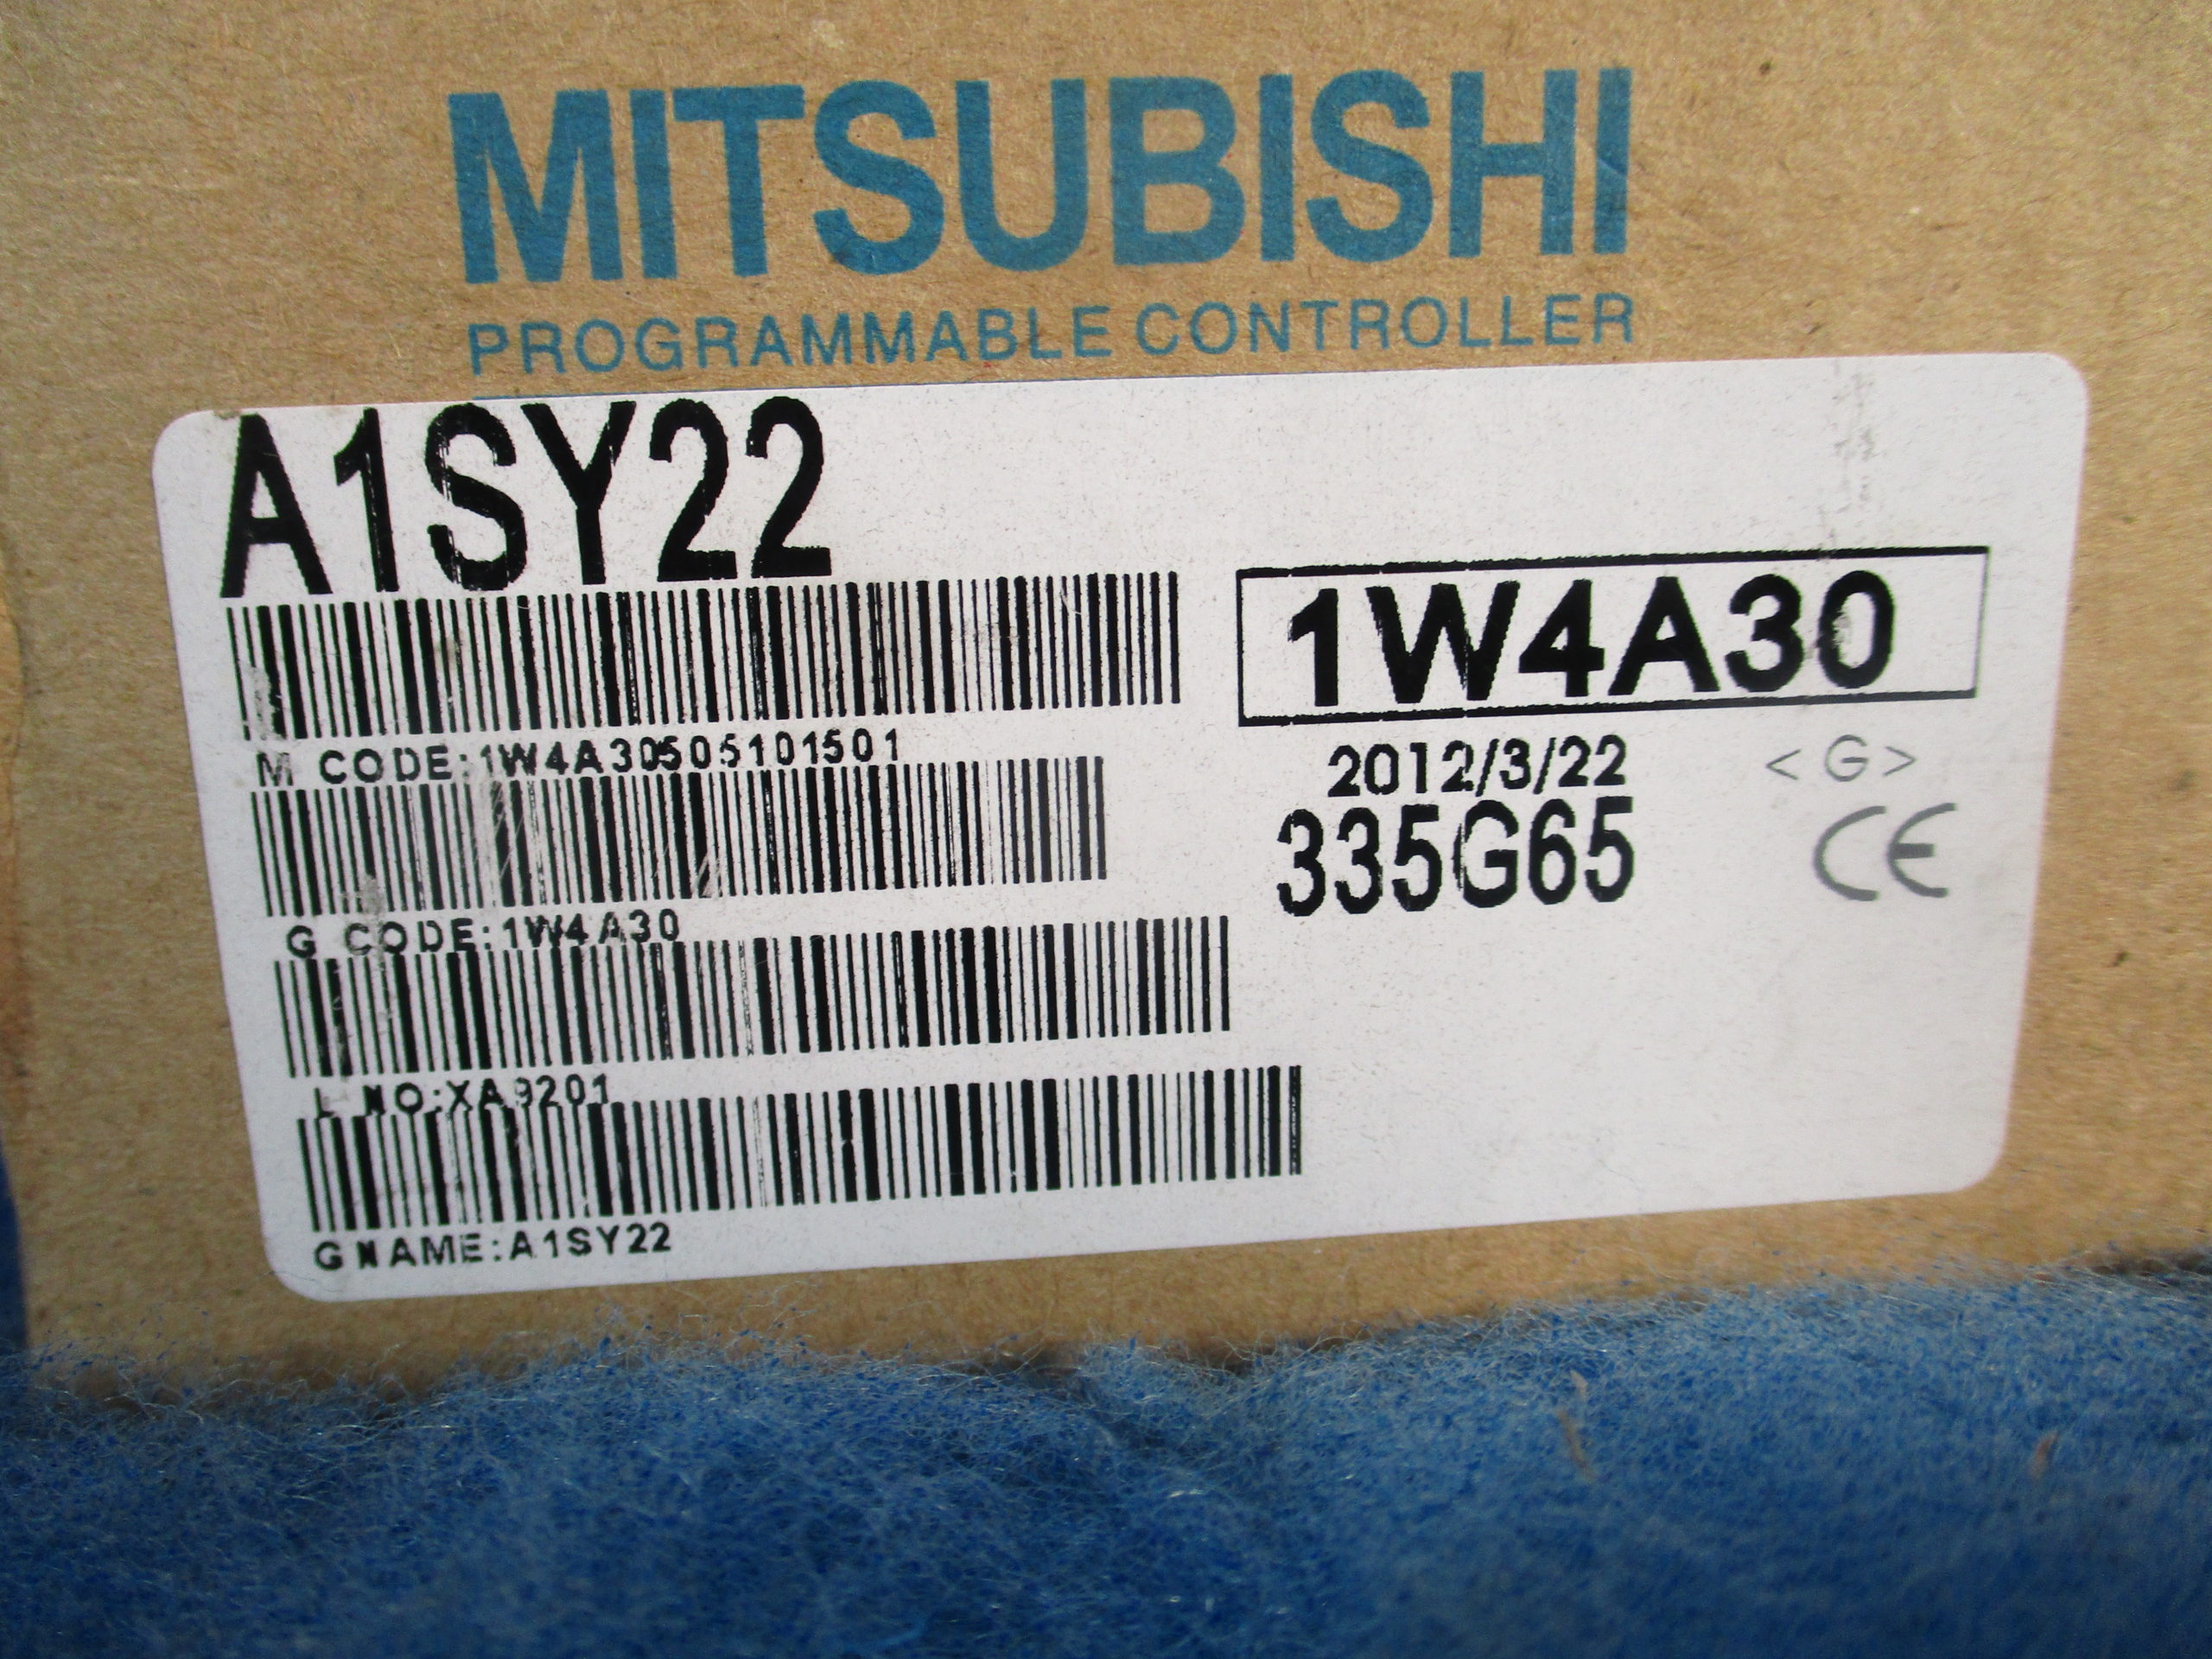 New in box Mitsubishi PLC A1SY22 Programmable Logic Controller 1 year warranty # 